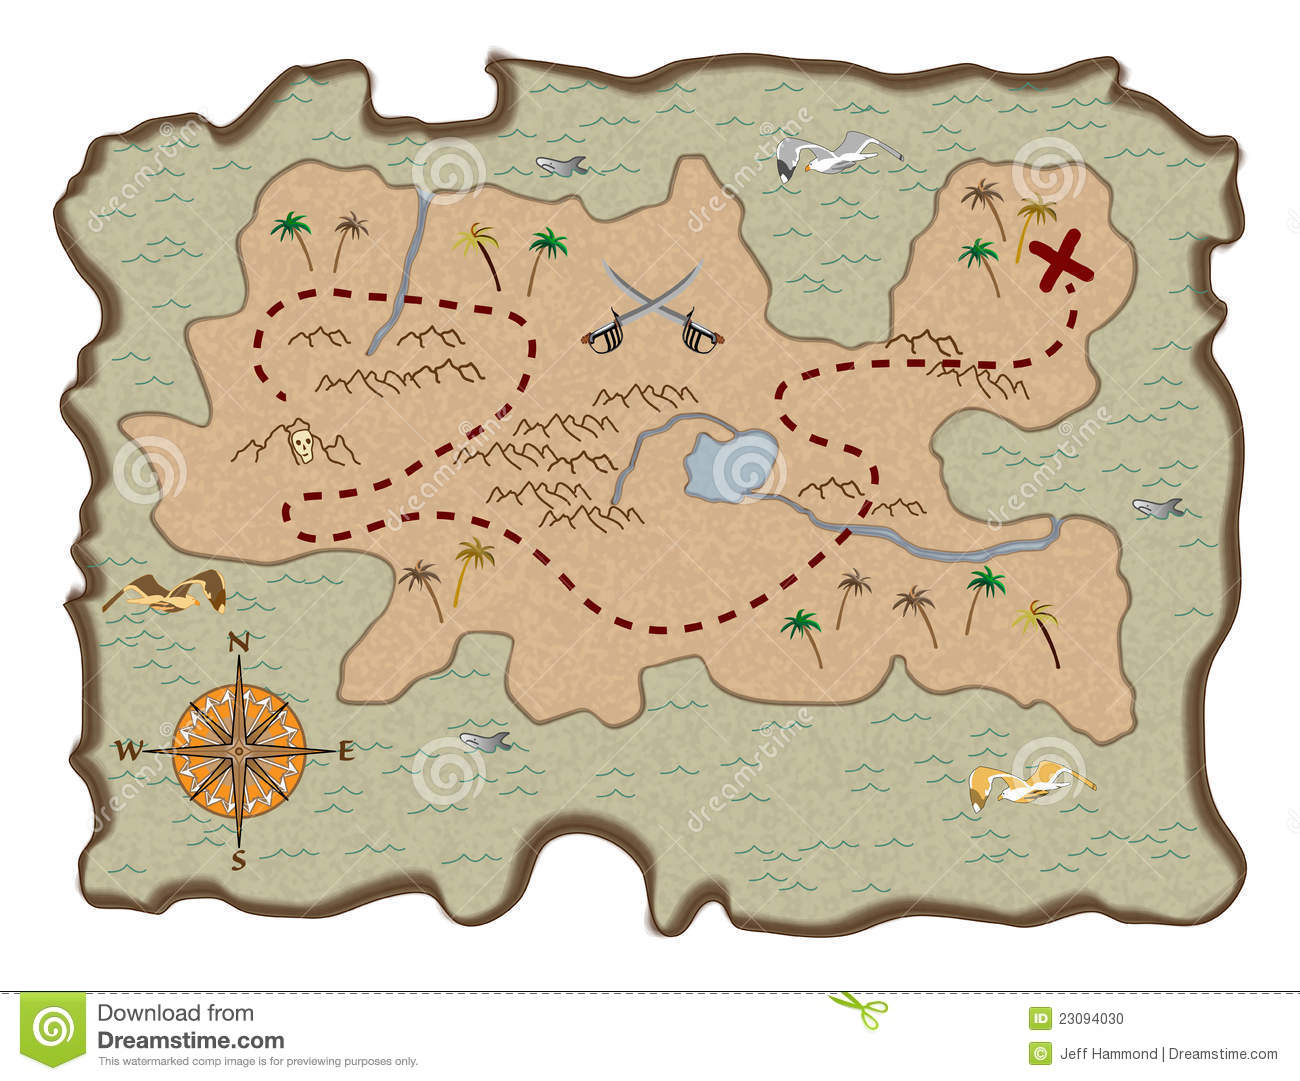 Vector Drawing Of A Tattered Treasure Map Showing An Island With A